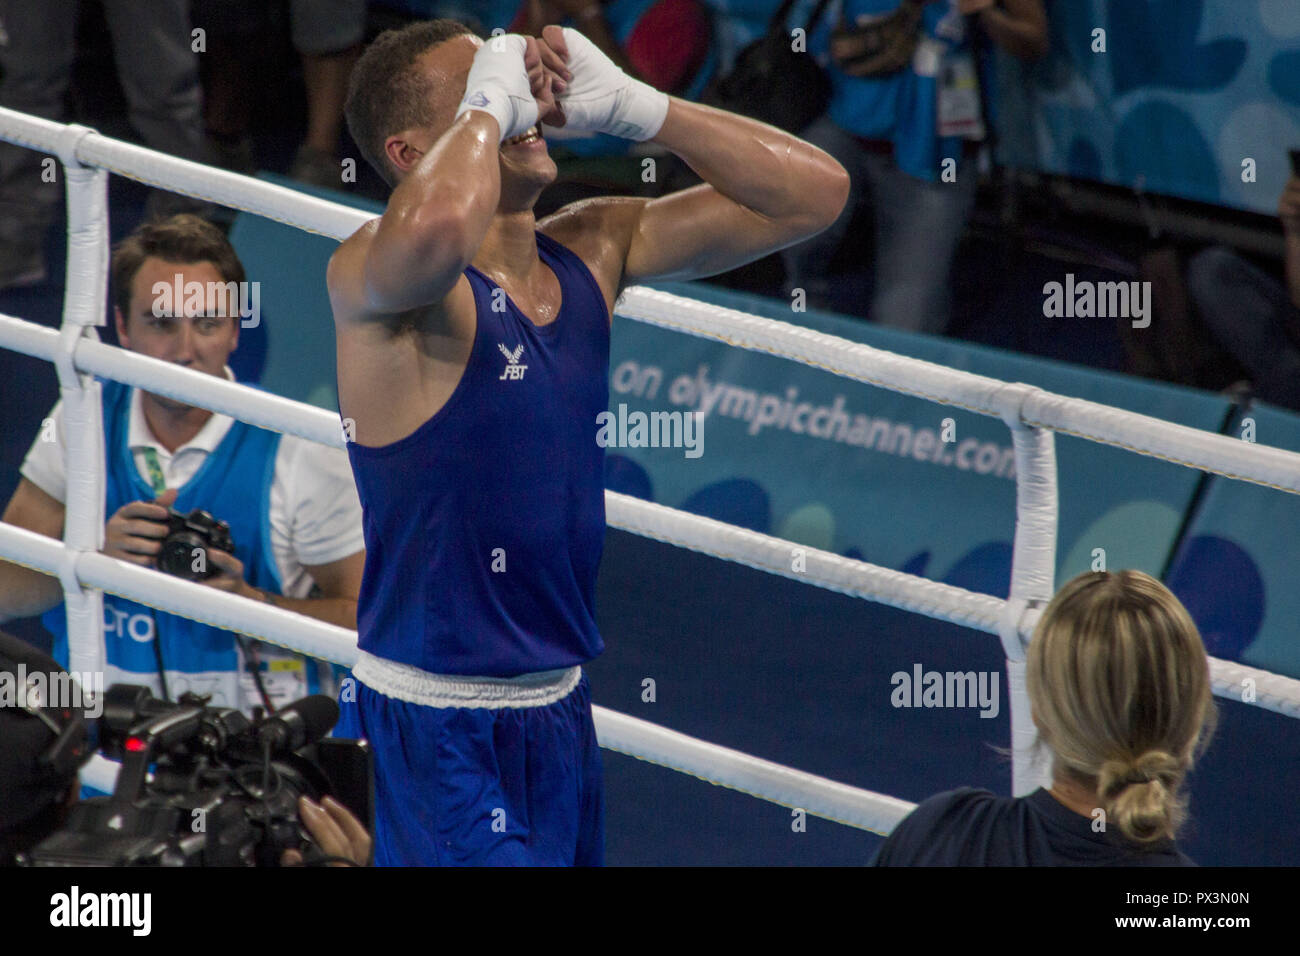 Buenos Aires, Buenos Aires, Argentina. 18th Oct, 2018. The British boxer Itauma Karol won the gold medal of the Men's Lightweight Weights (81 kg), in the Youth Olympic Games, Buenos Aires 2018, after three rounds. The Russian boxer Kolesnikov Ruslan, was winner of the Silver Medal. Credit: Roberto Almeida Aveledo/ZUMA Wire/Alamy Live News Stock Photo